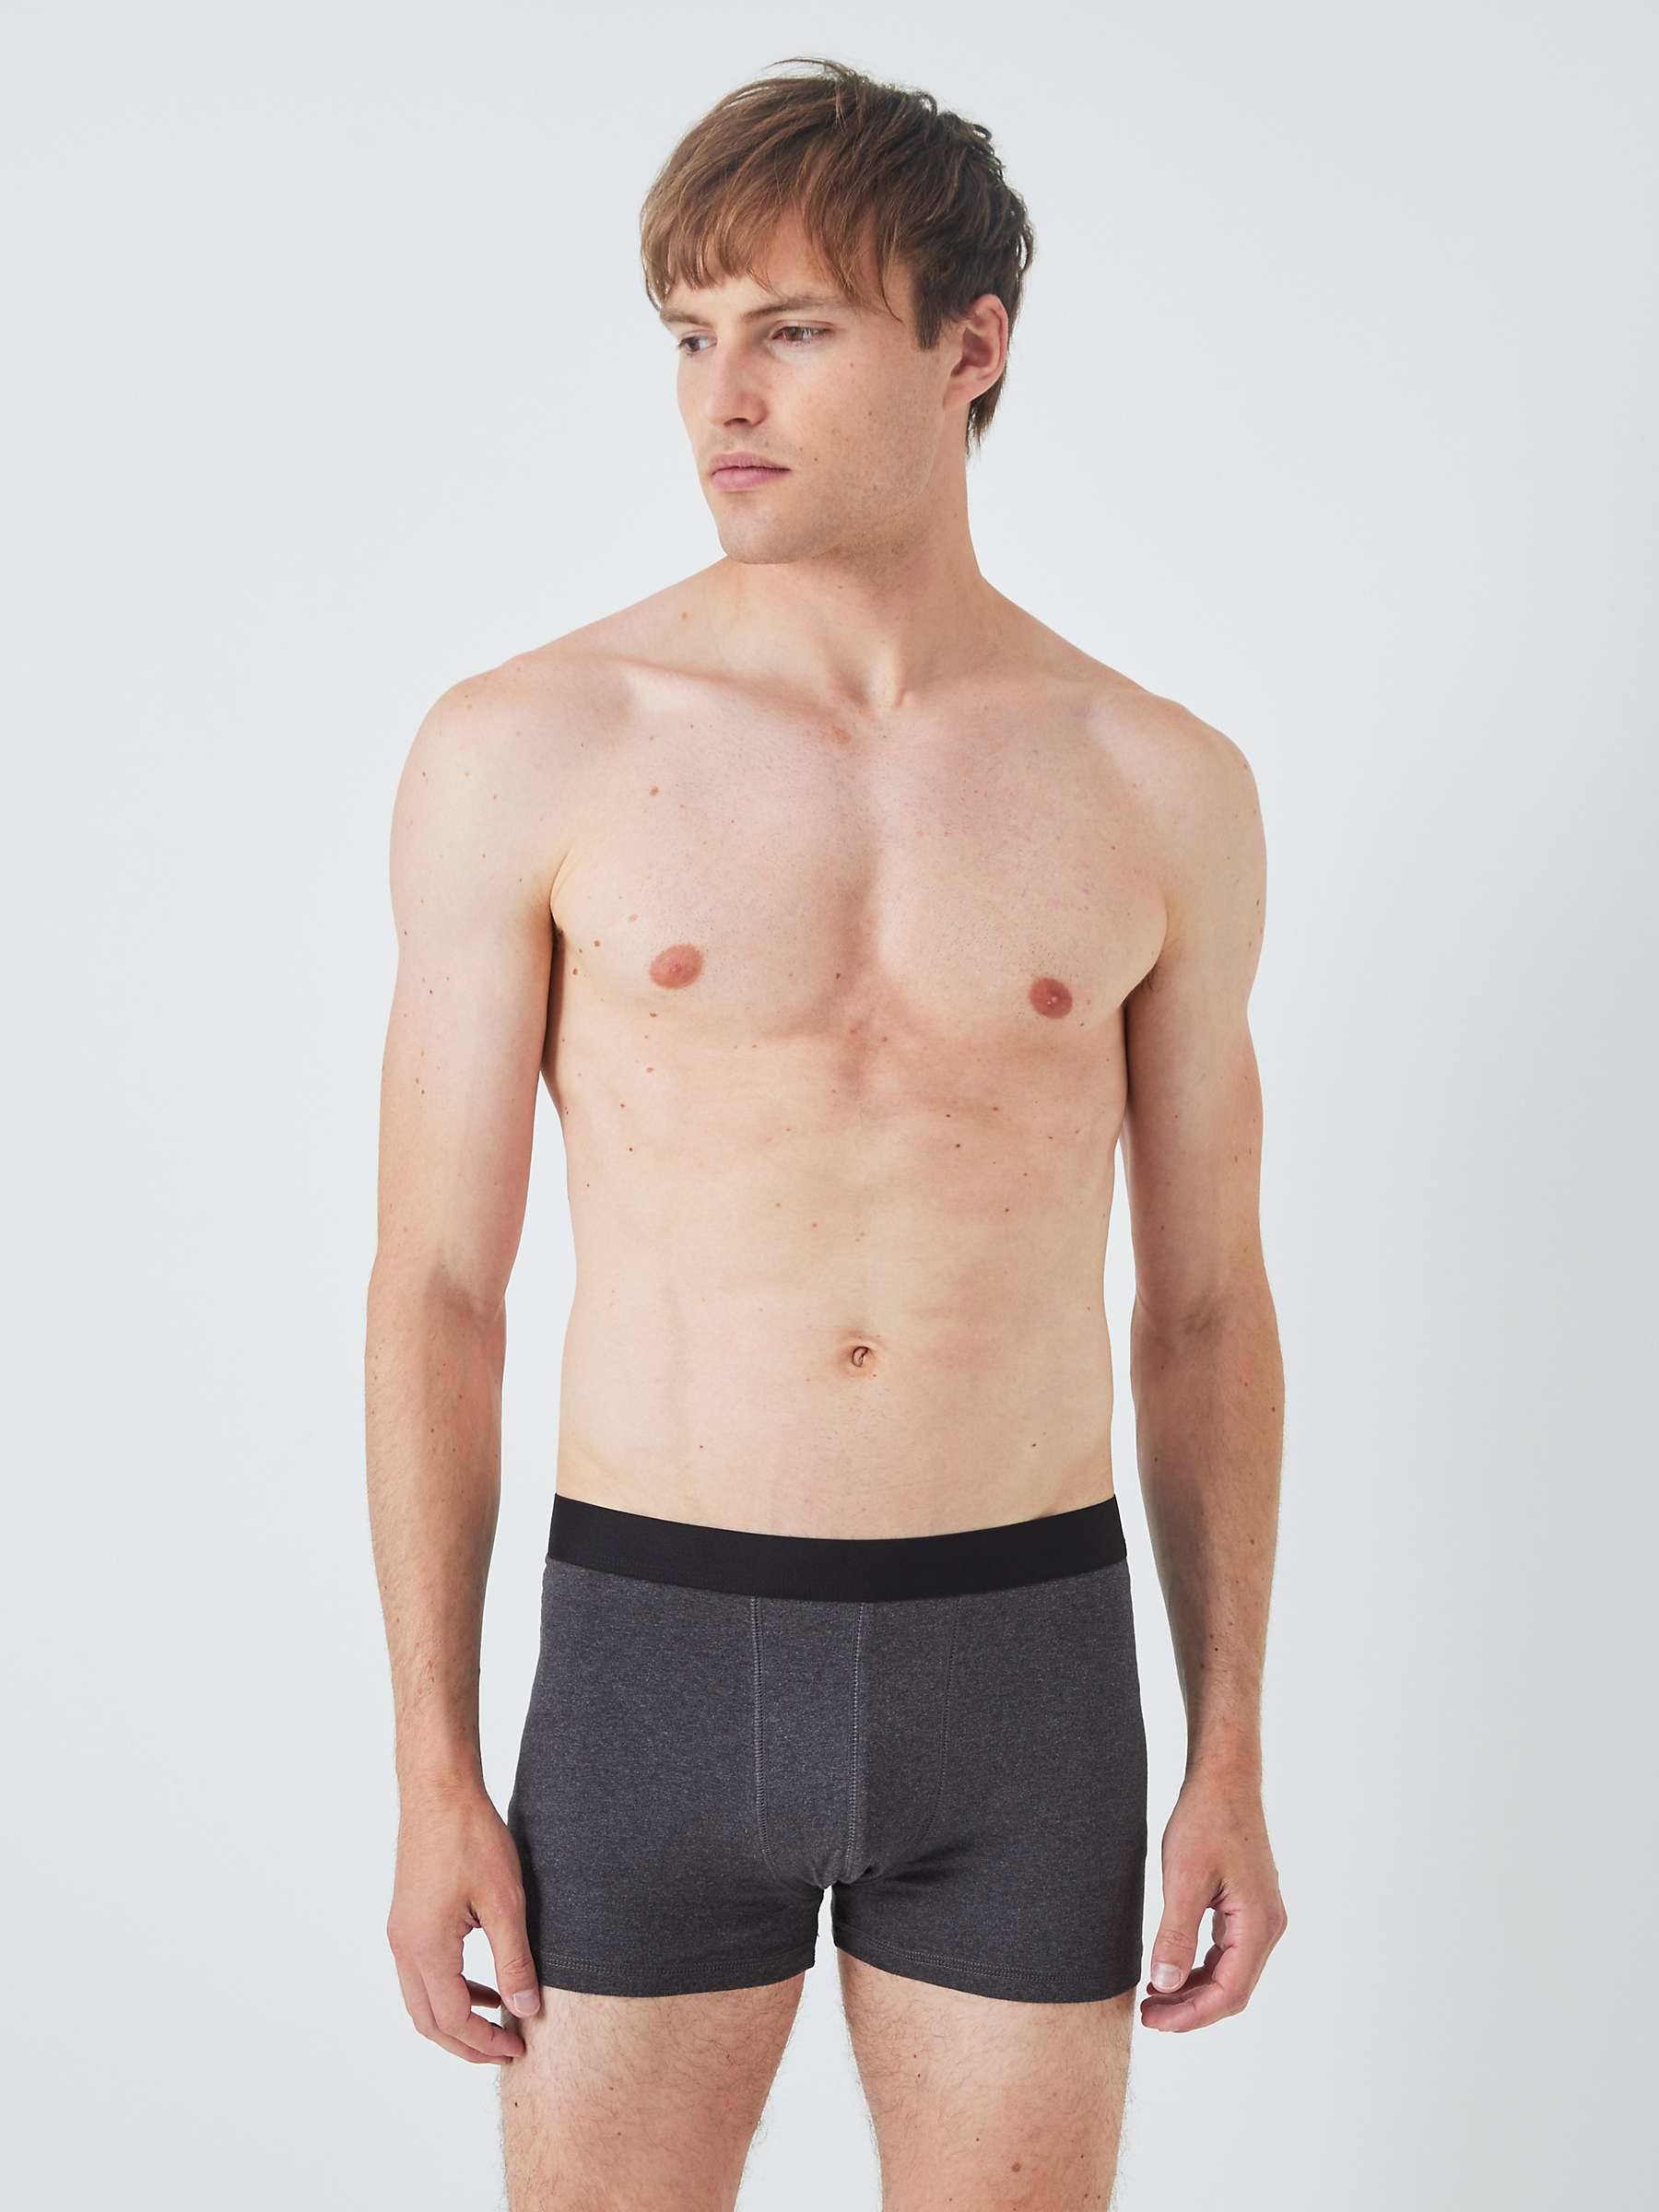 Buy John Lewis ANYDAY Cotton Stretch Trunks, Pack of 5, Black/Grey Online at johnlewis.com